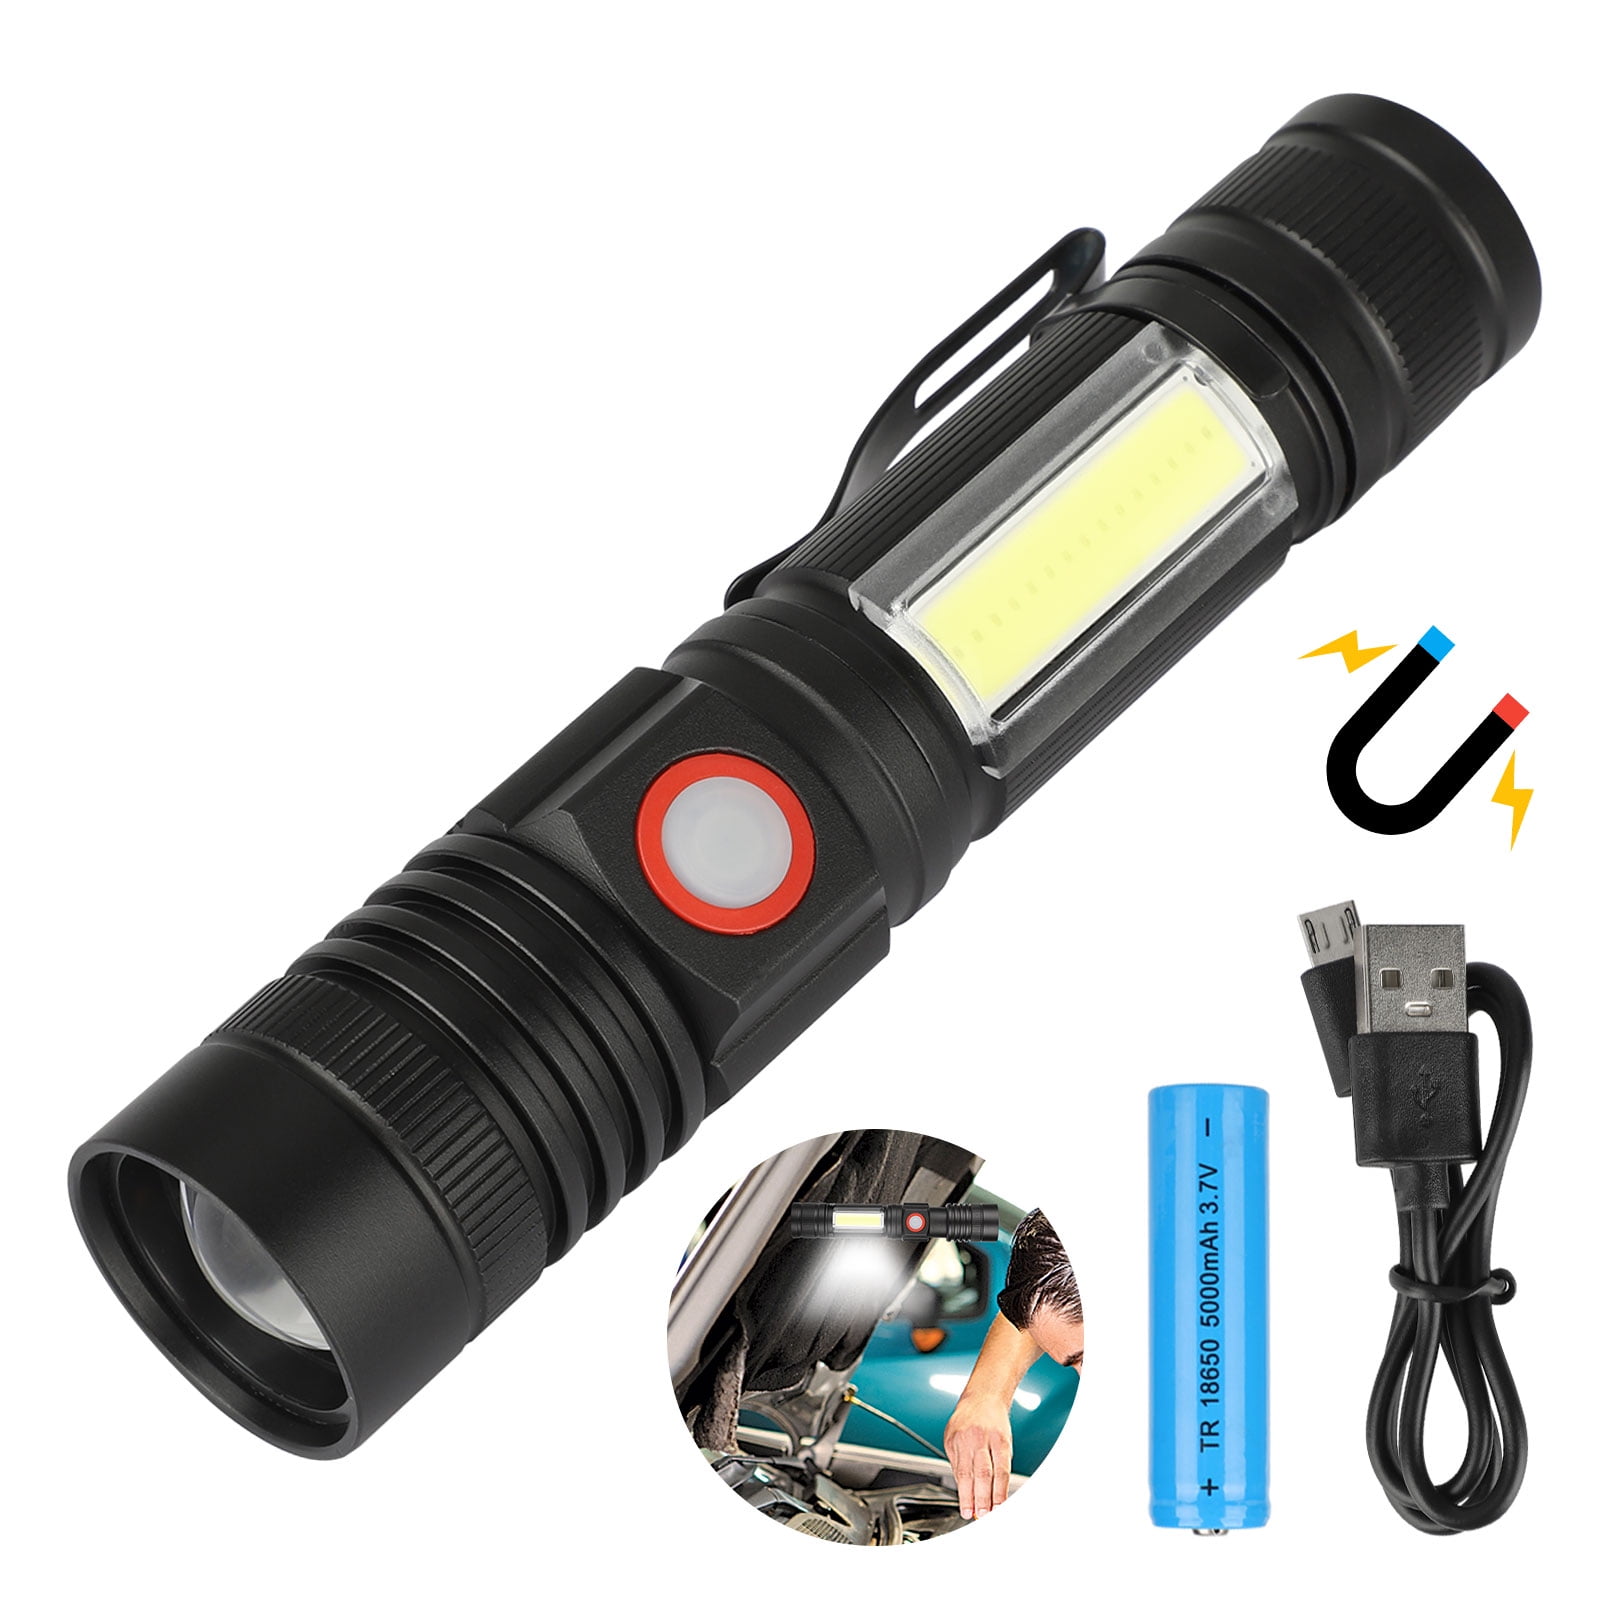 2 x CREE HEAD LAMP SUPER BRIGHT LIGHT TORCH ZOOM camping hiking inspection 